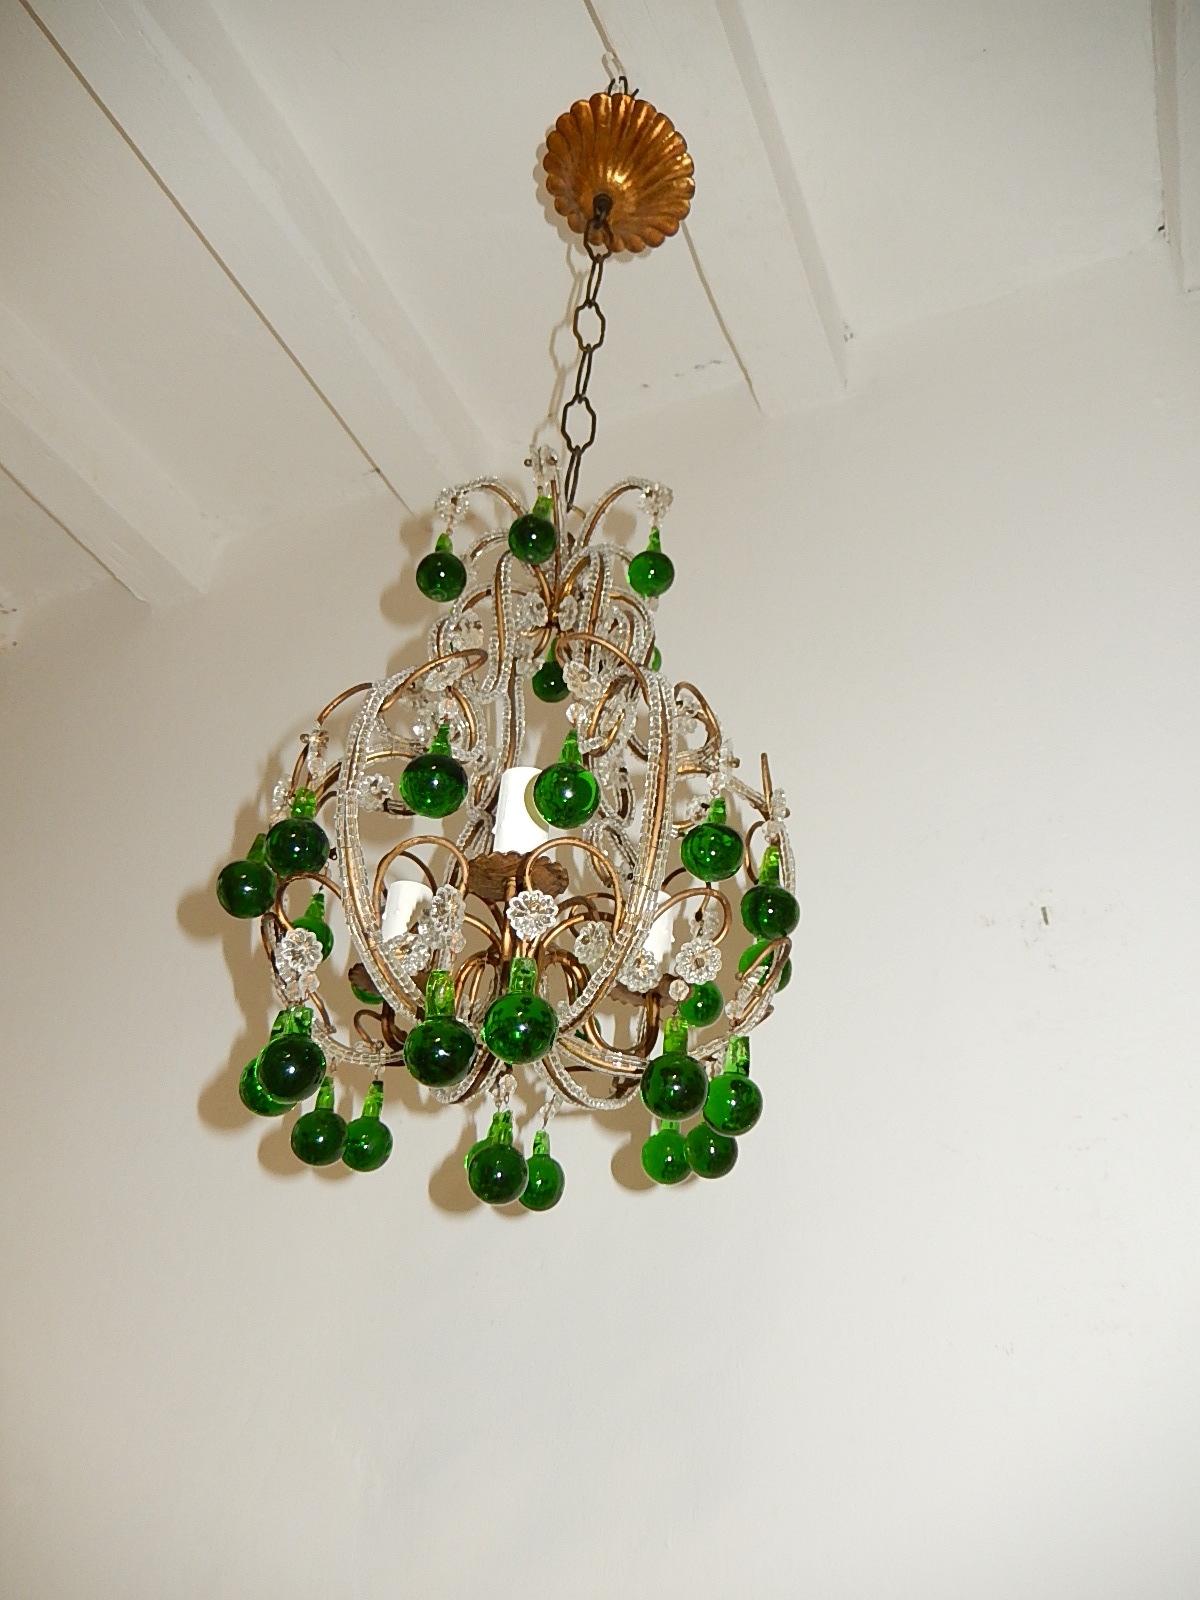 Housing one light. Will be rewired and ready to hang with the correct socket of country. Rare bulbous dark forest green Murano drops. Also adorning florets and crystal balls. Adding another 12 inches of original chain and canopy! Free priority UPS